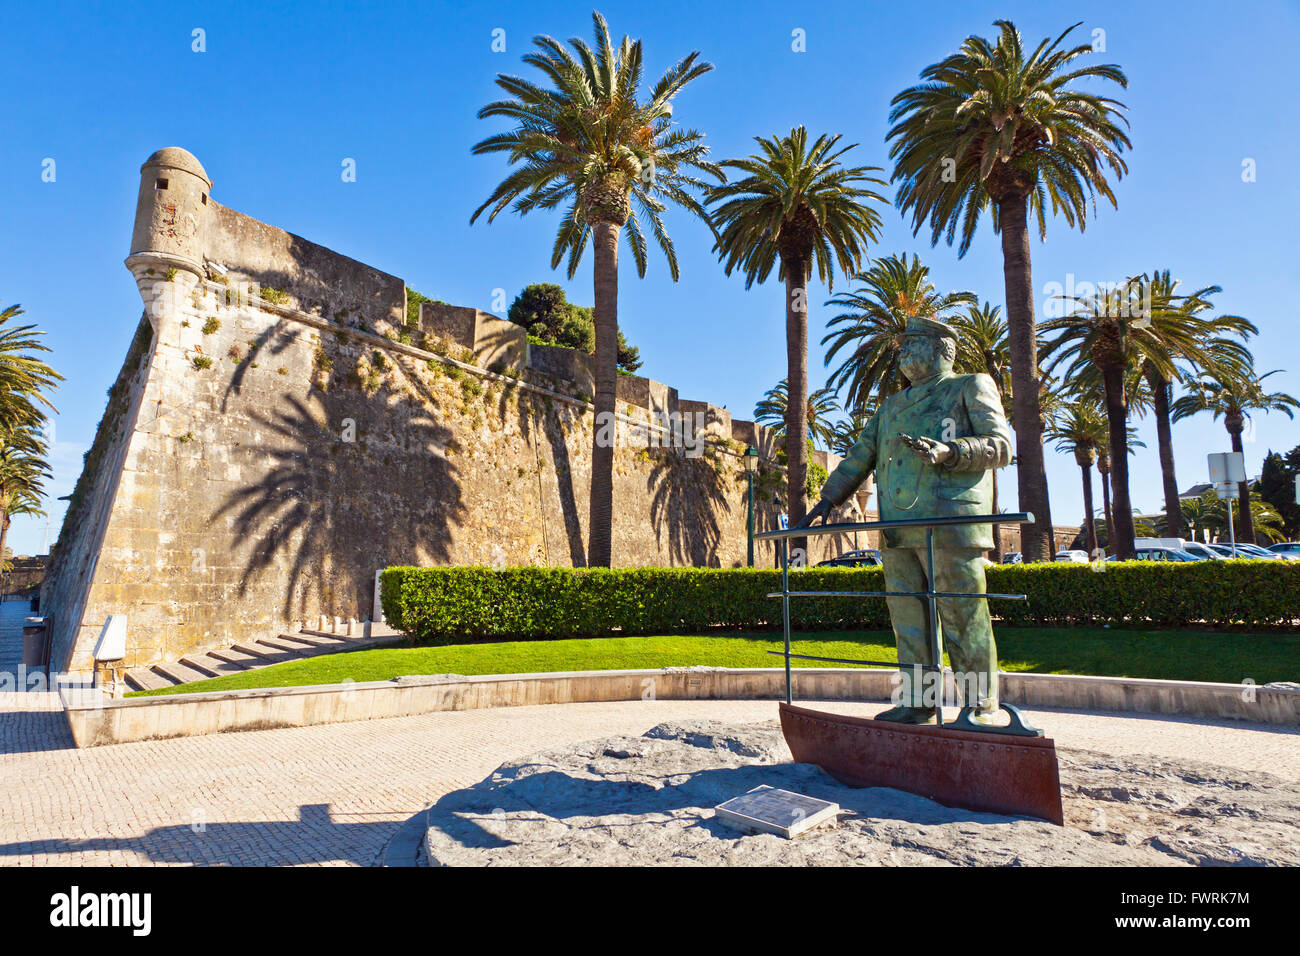 Statue of Dom Carlos I, King of Portugal, Cascais city, Portugal Stock Photo